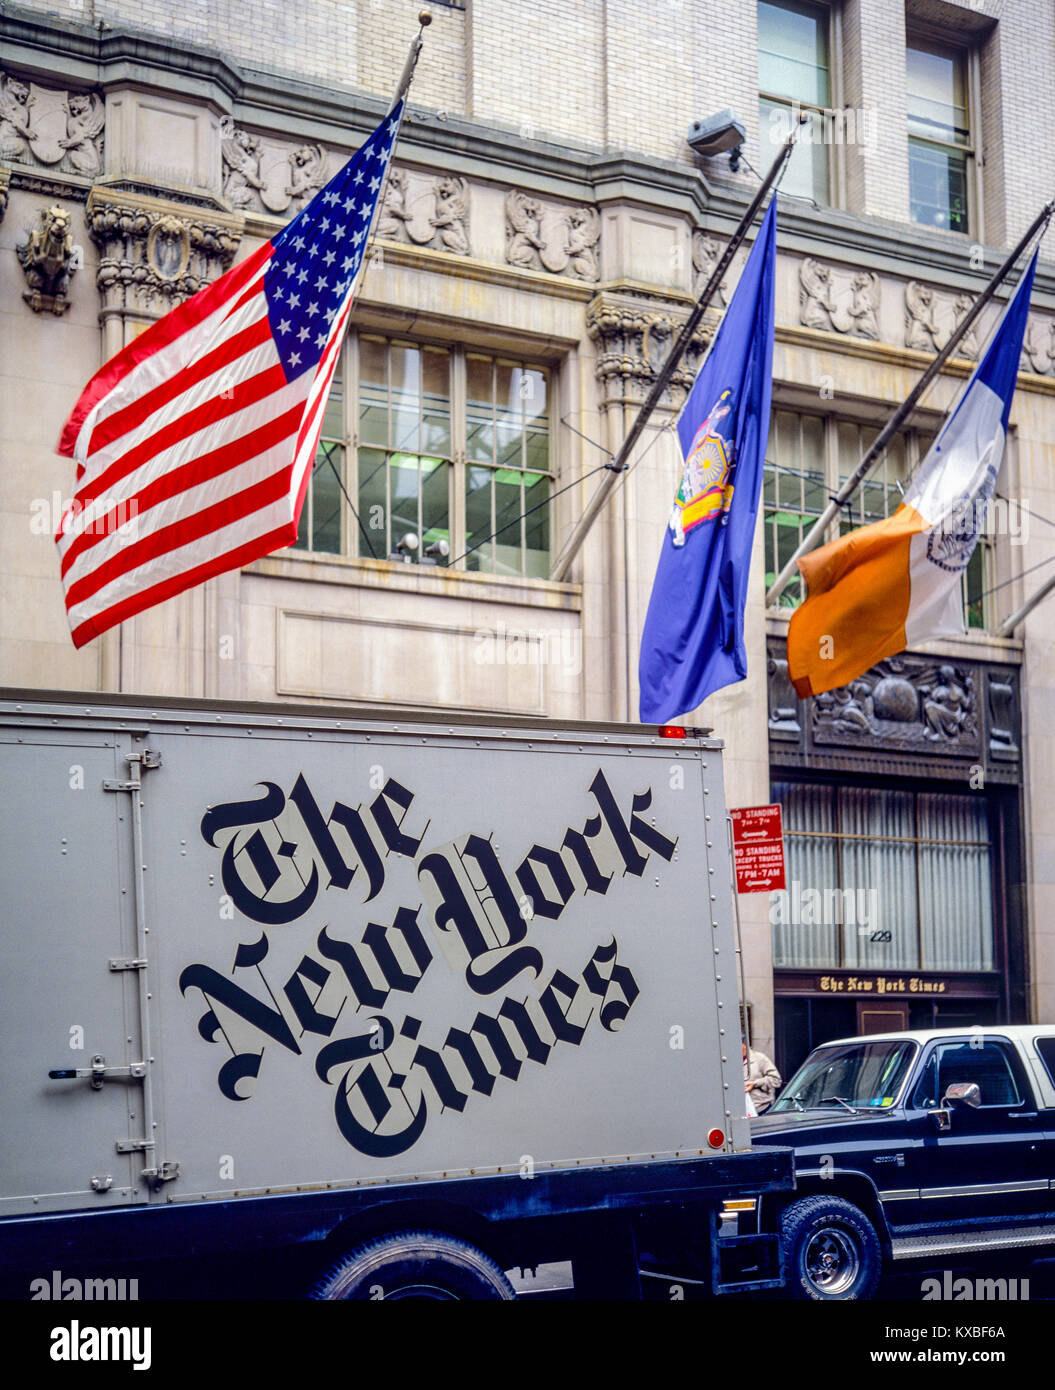 New York 1980s, The New York Times newspaper delivery truck, flags, 229 West 43rd street, Manhattan, New York City, NY, NYC, USA, Stock Photo